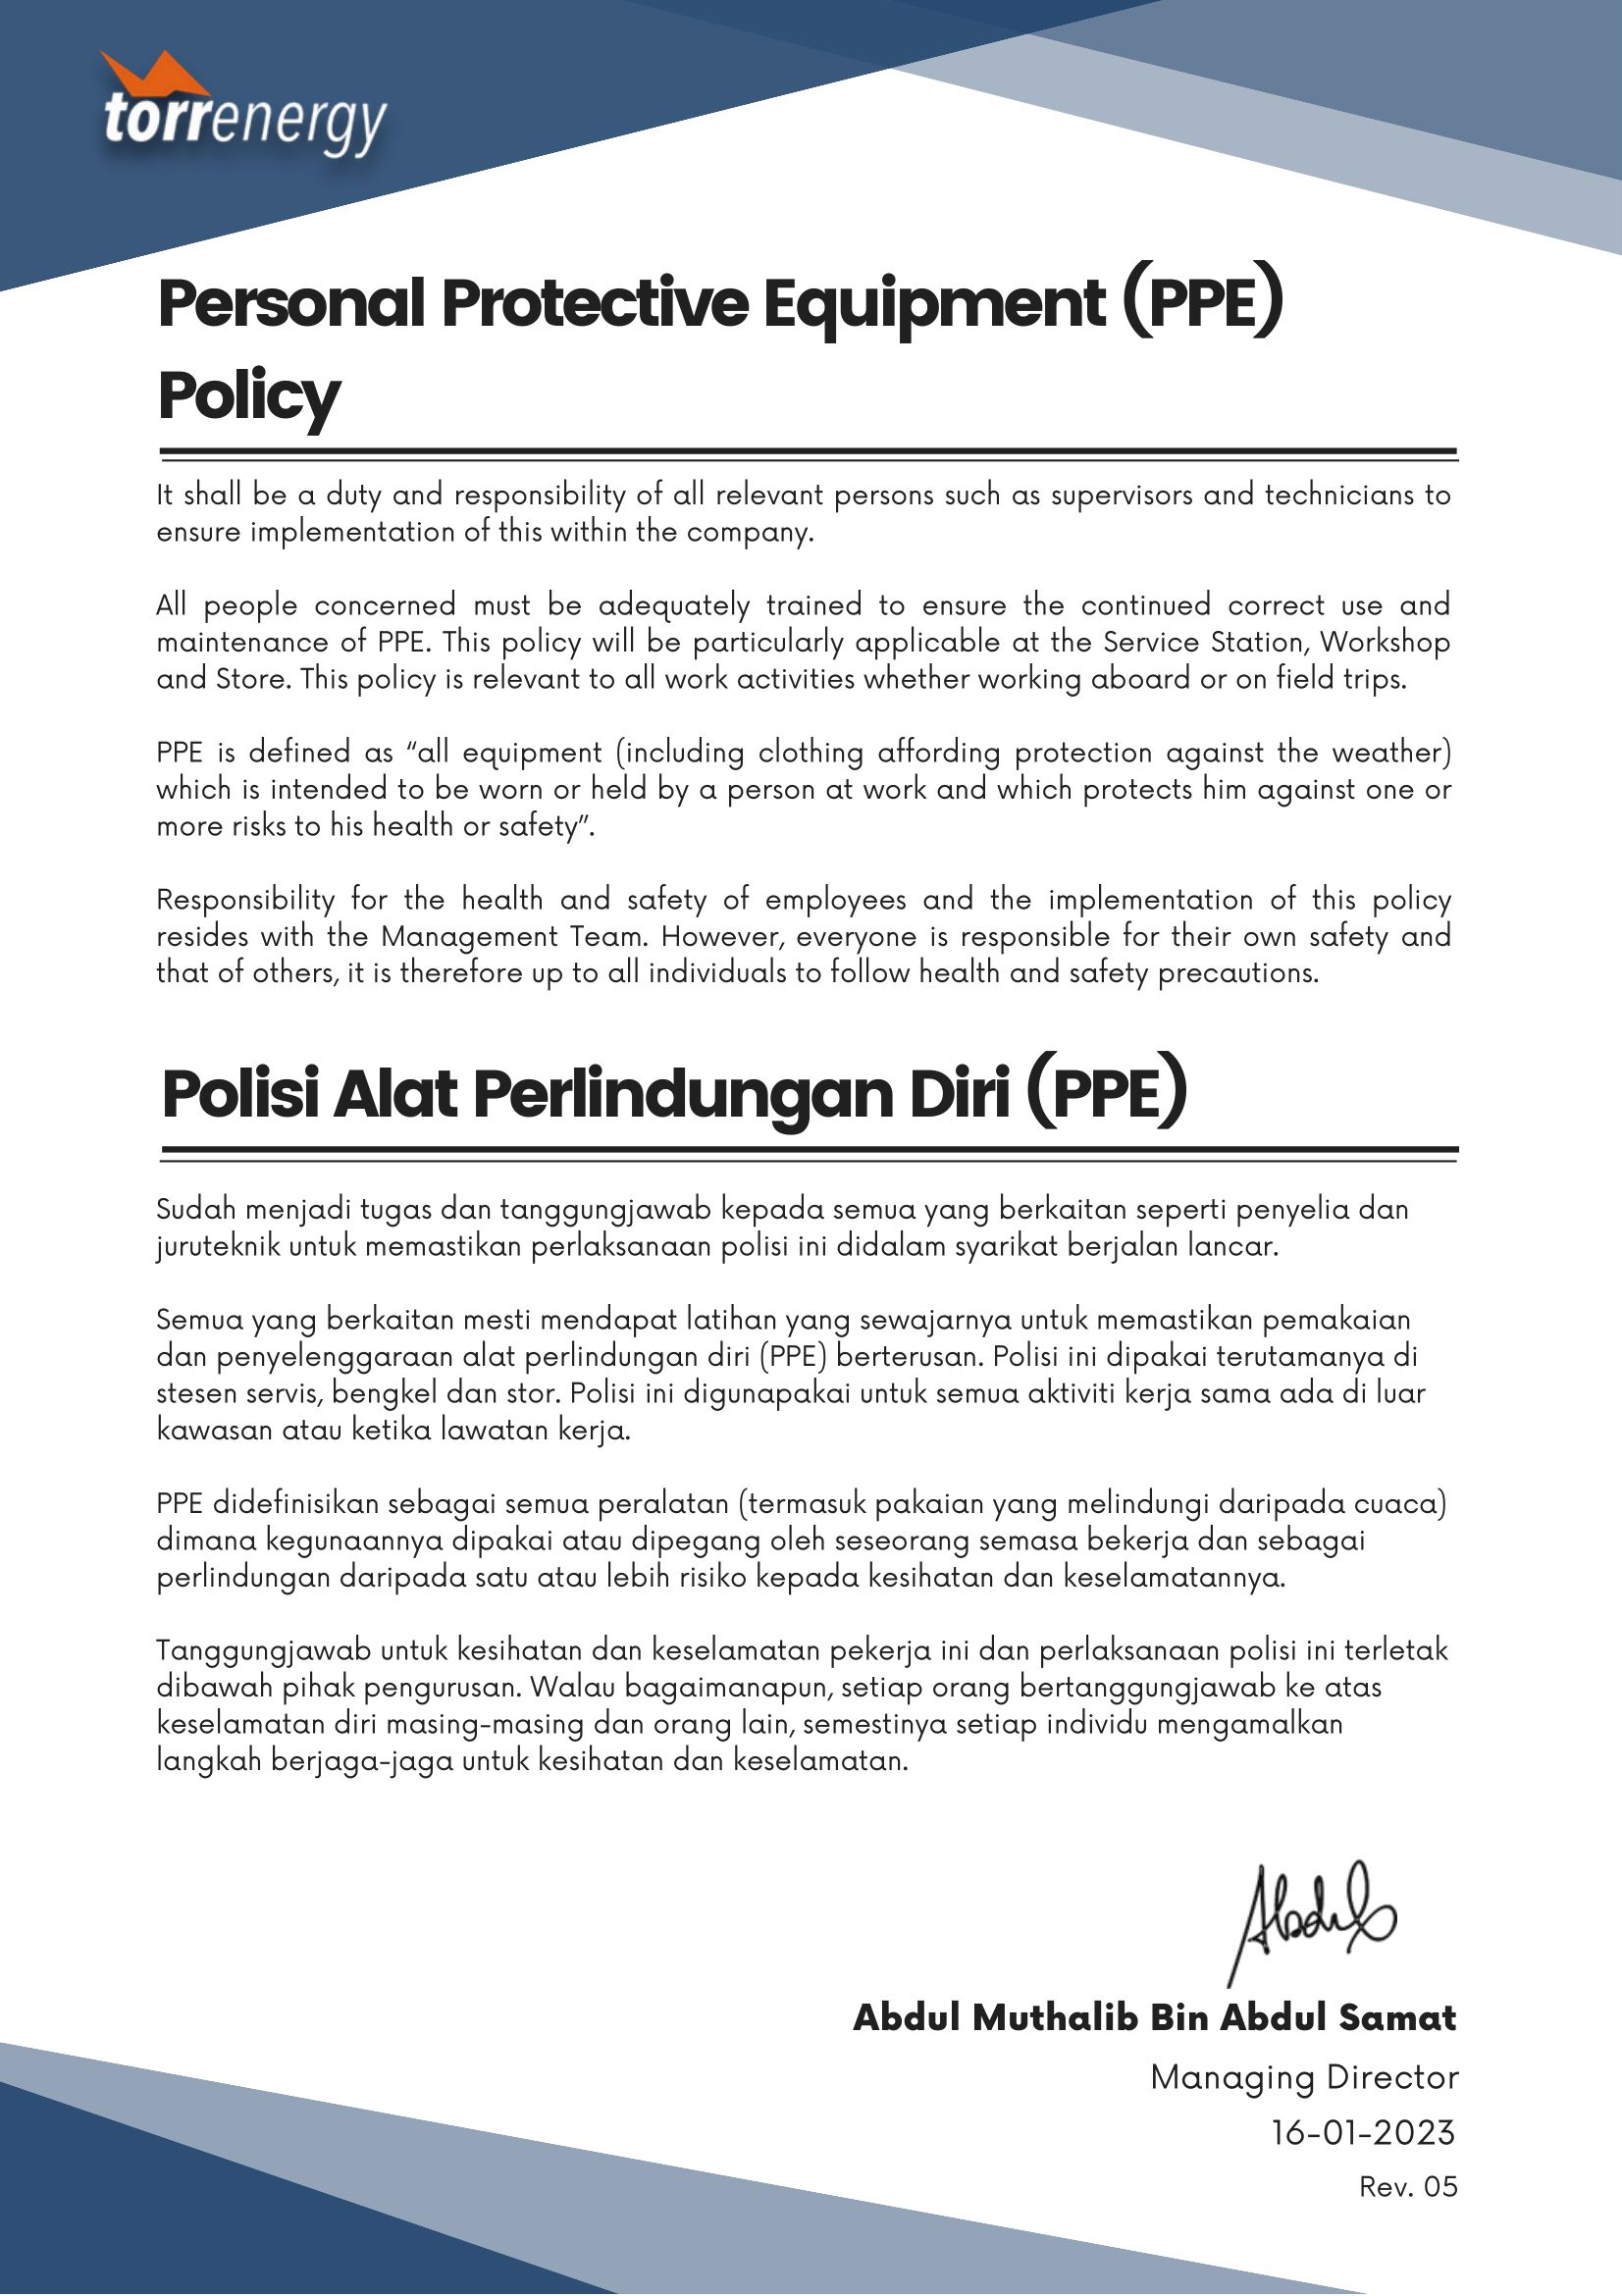 PPE Policy